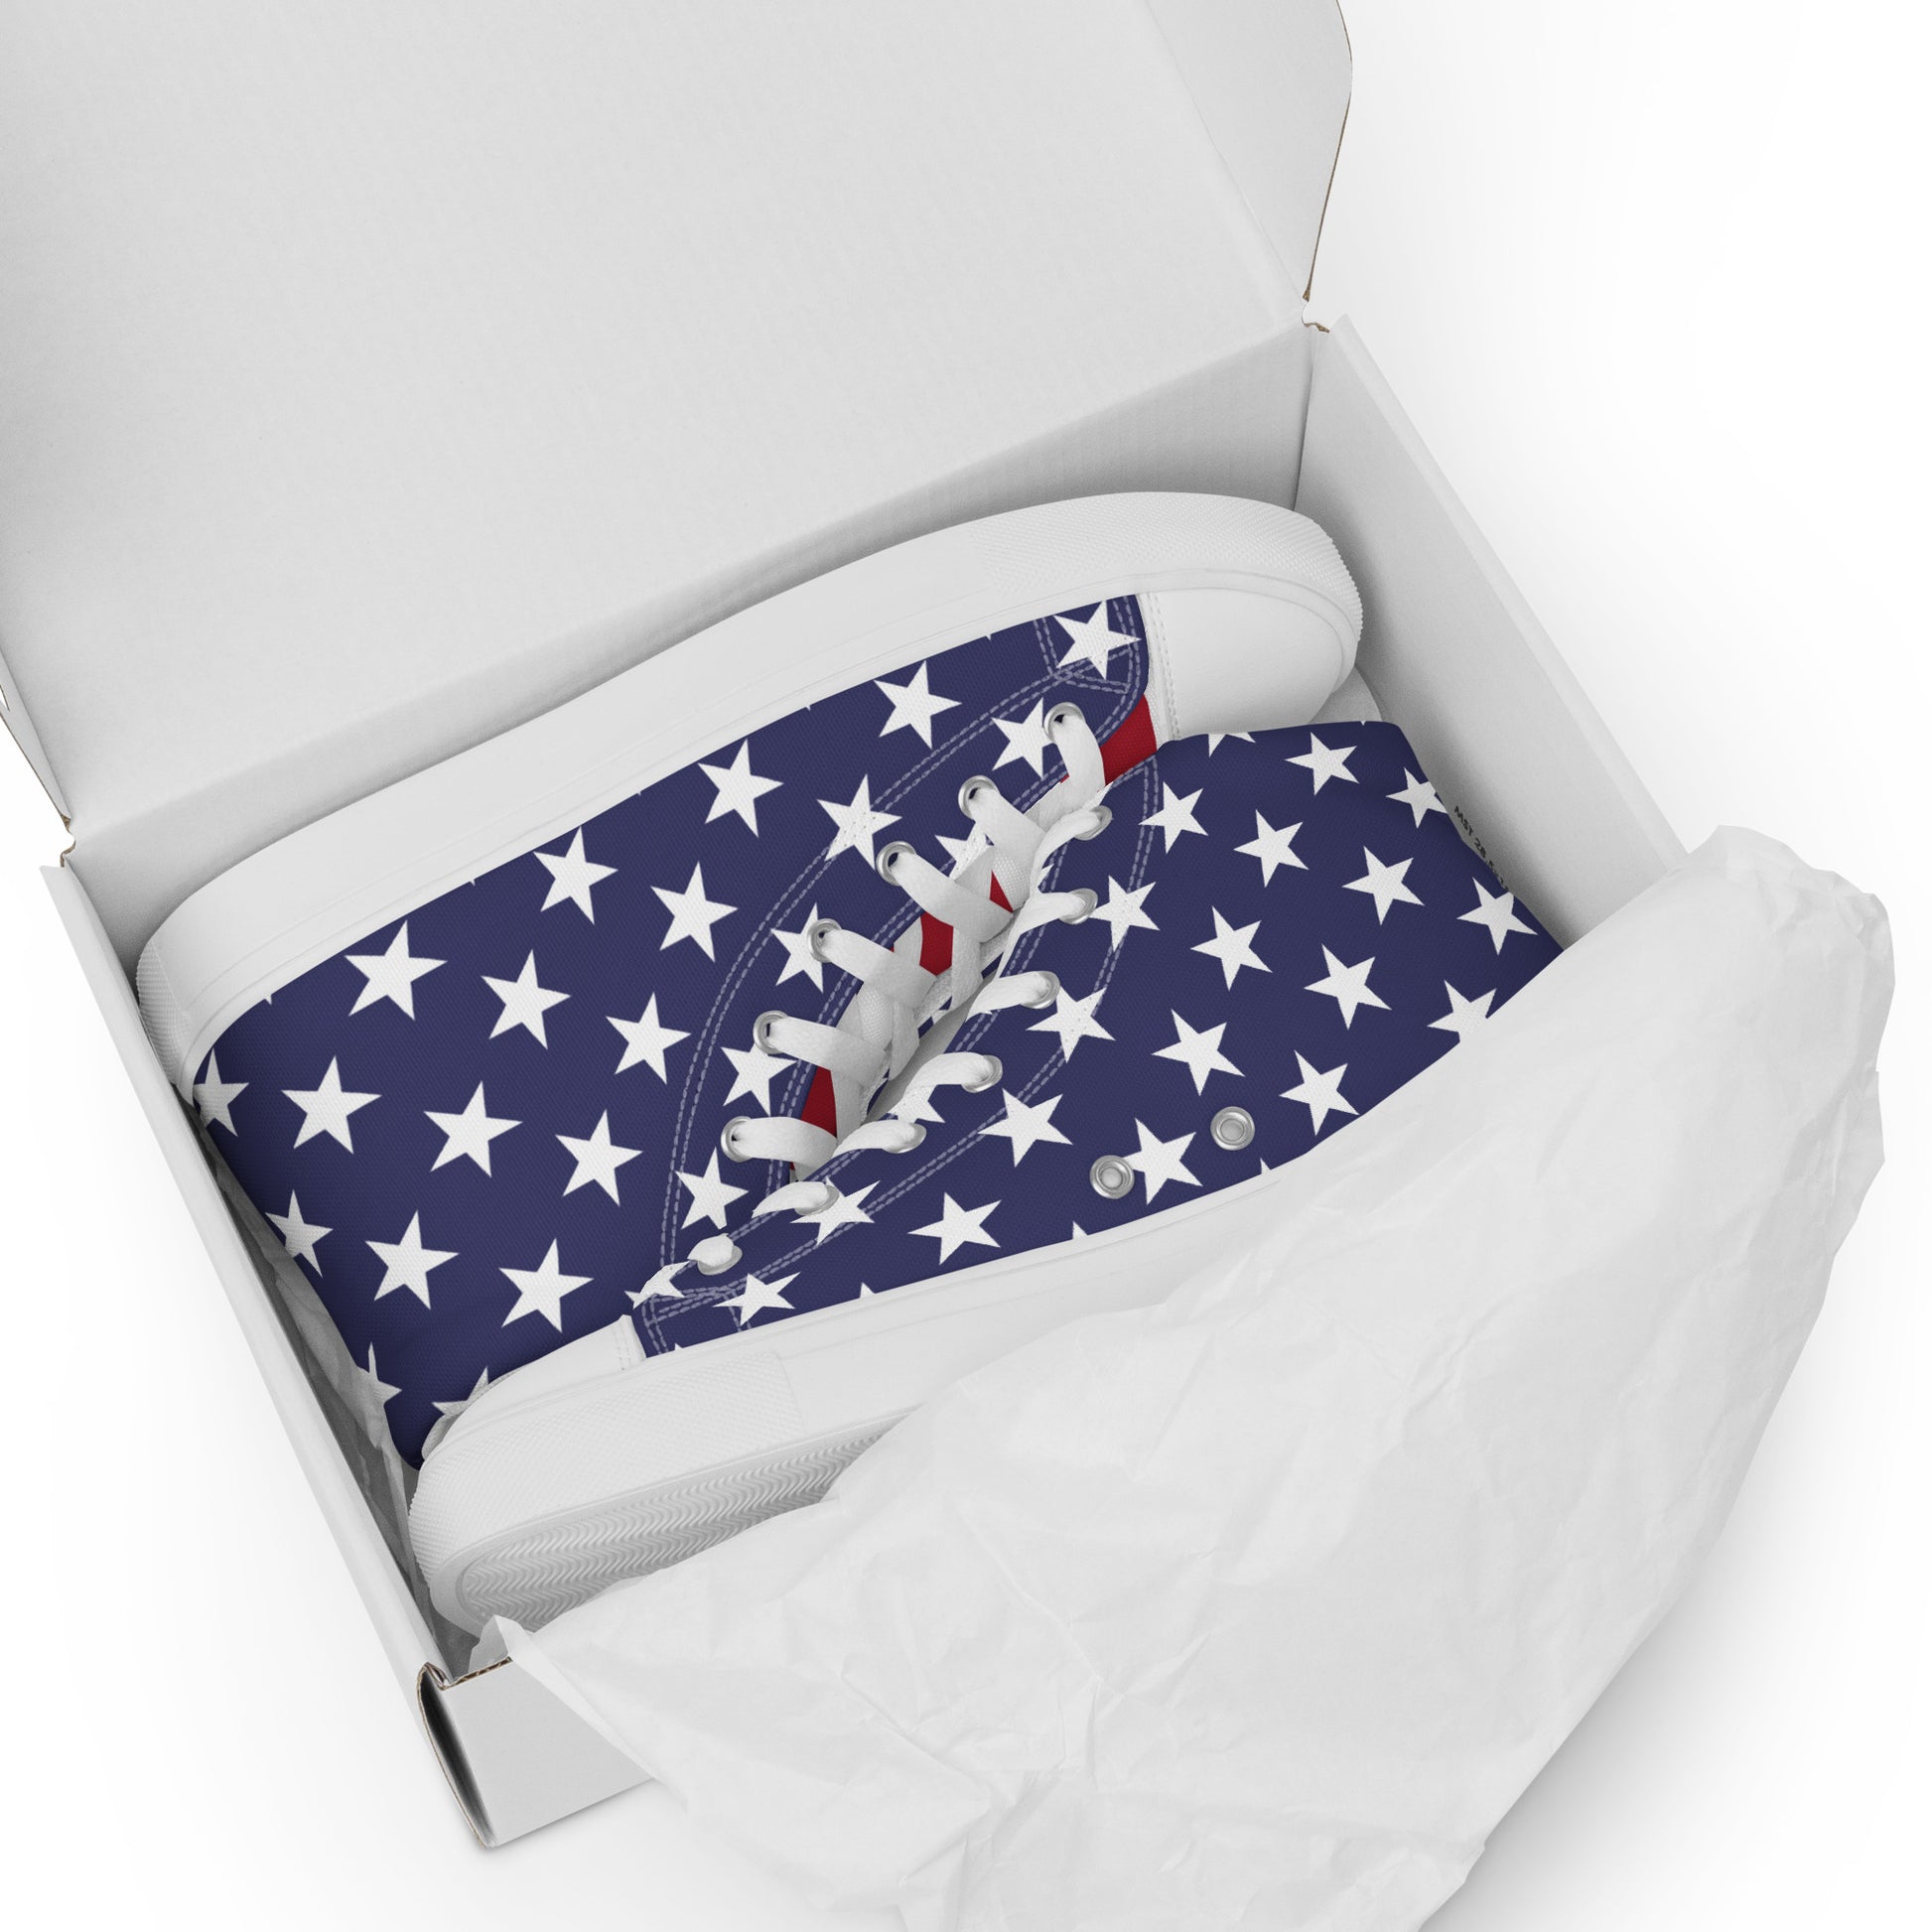 Cool High Top Sneakers For Men With American Flag Print in a box